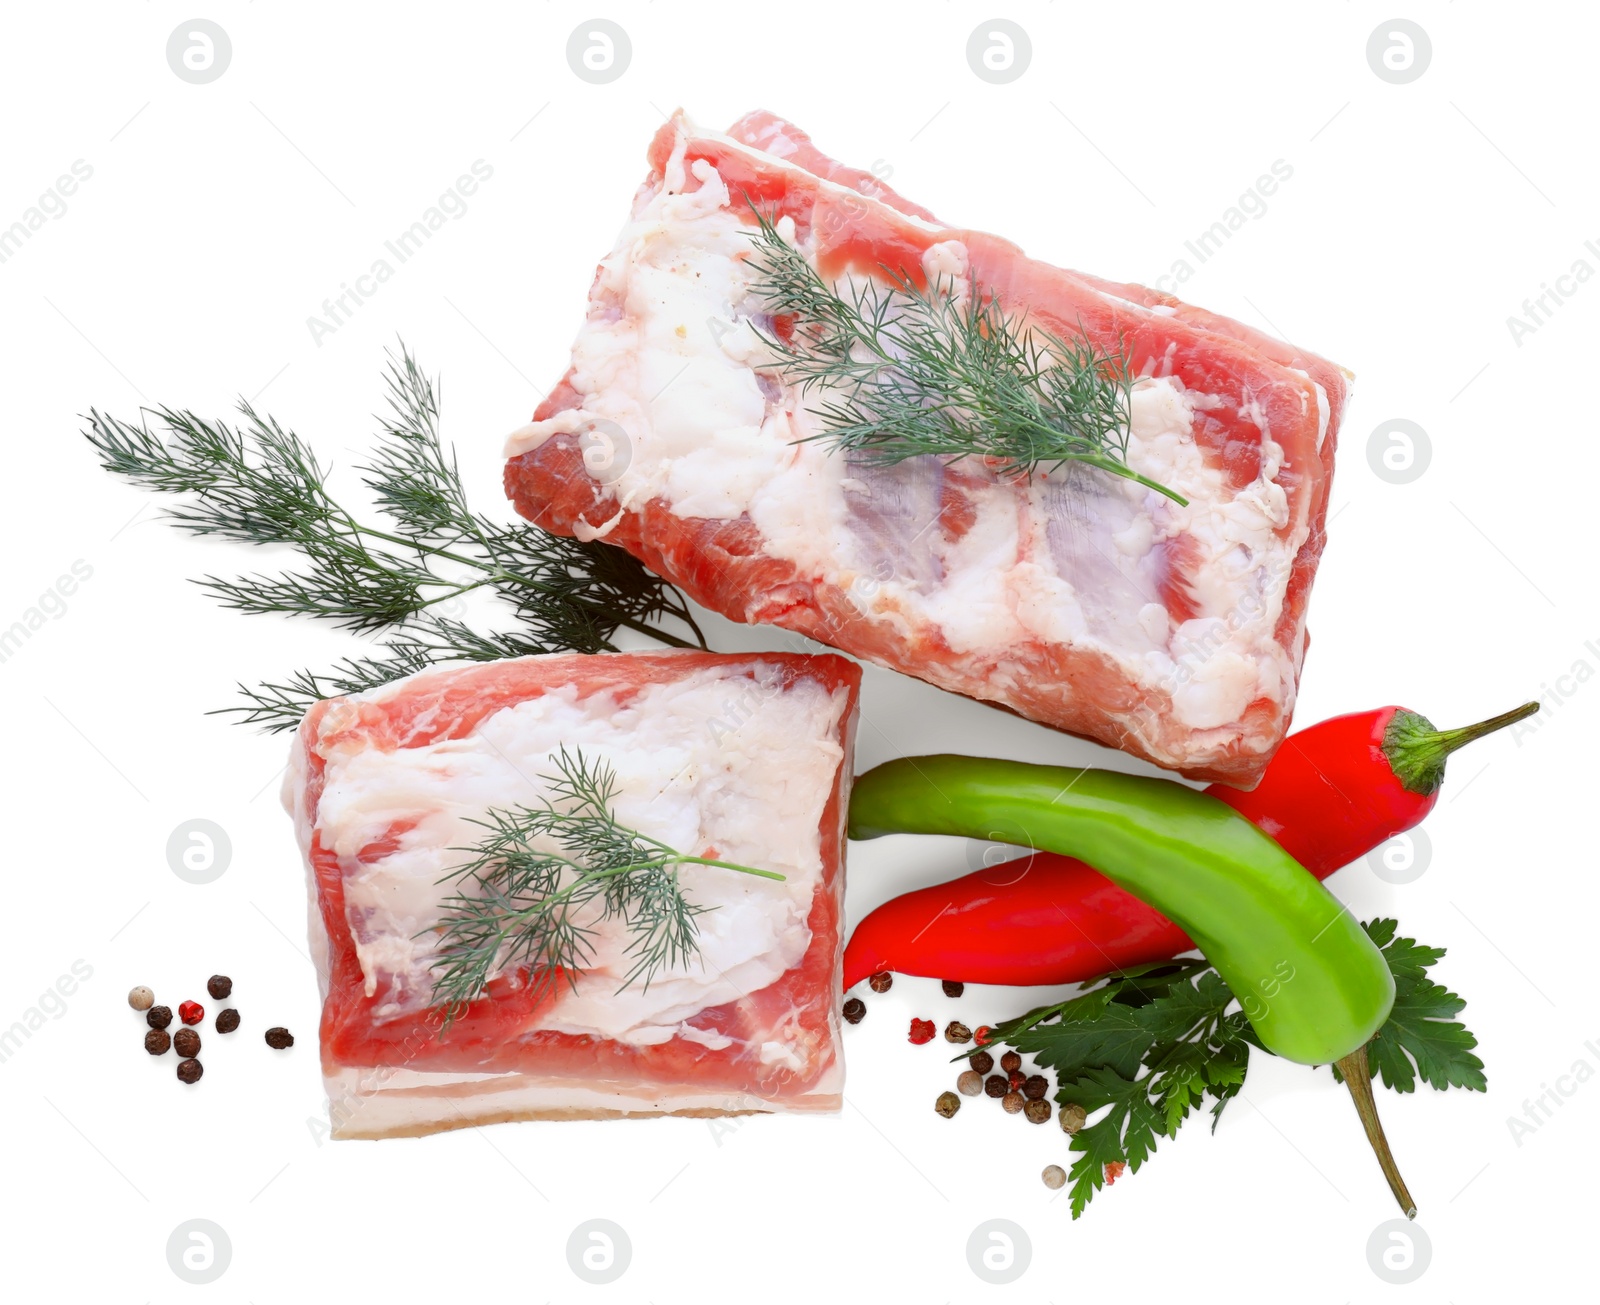 Photo of Pieces of pork fatback and different spices on white background, top view